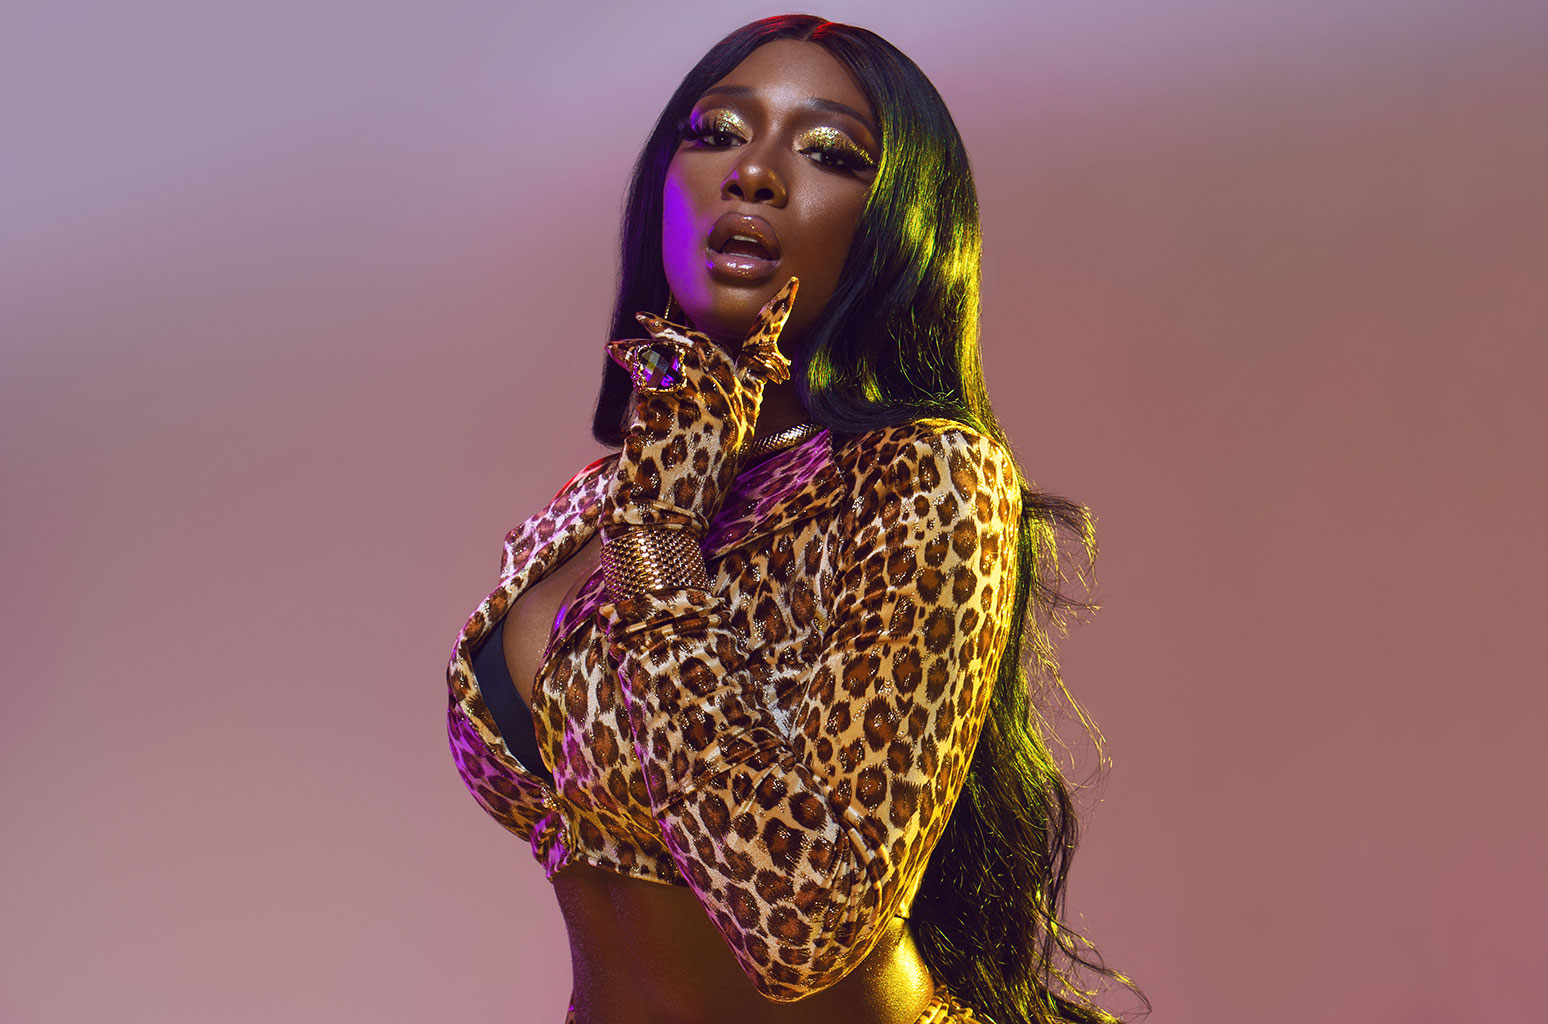 From Calvin Harris to Megan Thee Stallion, What's Your Favorite New Release This Week? Vote!